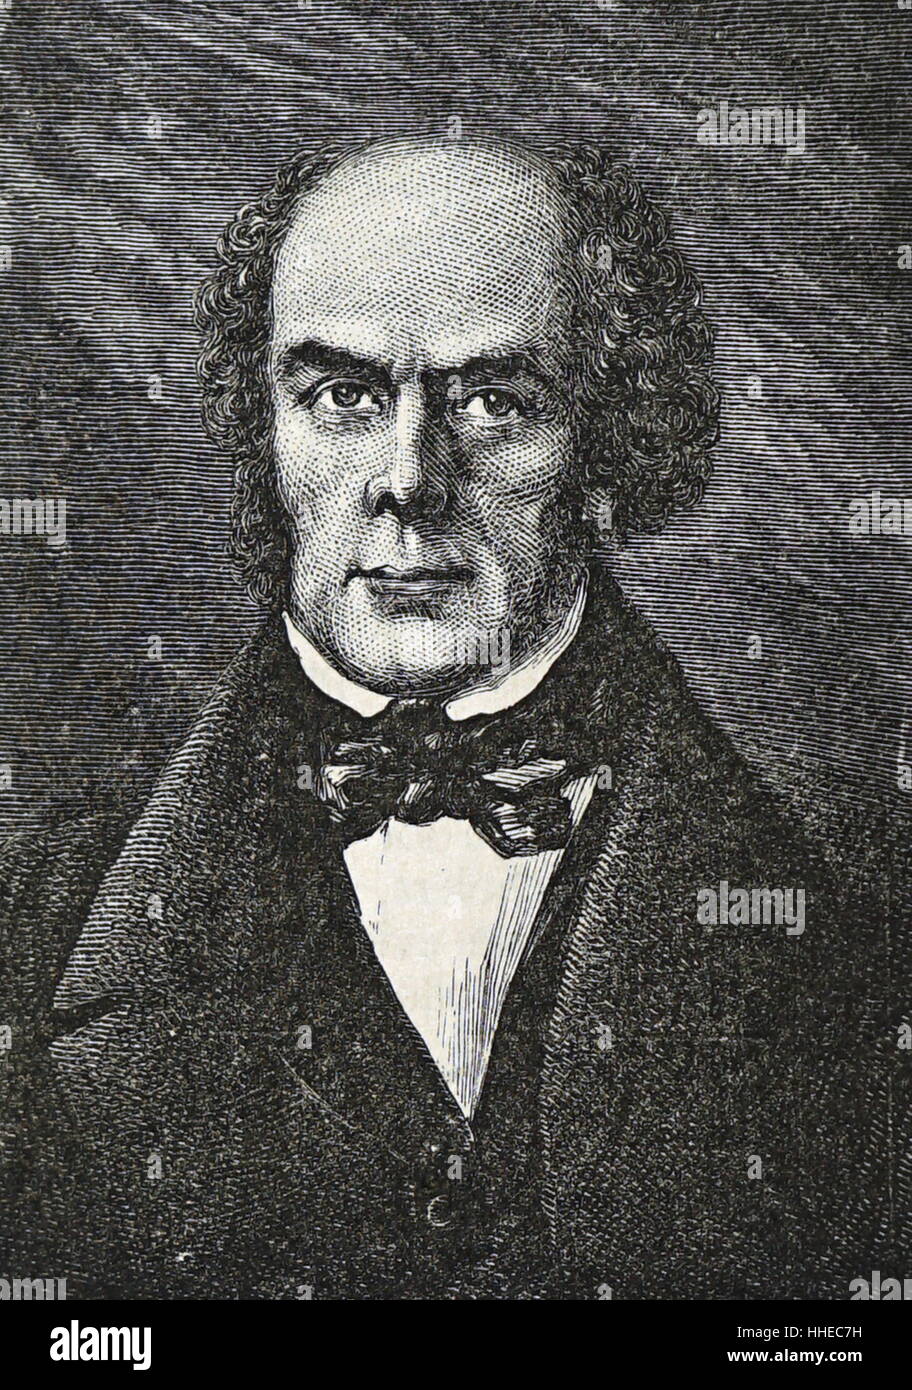 Henry HETHERINGTON (1792-1849) printer, publisher and Chartist. Died in the London cholera epidemic of 1849. objected to stamp duty on newspapers. Stock Photo